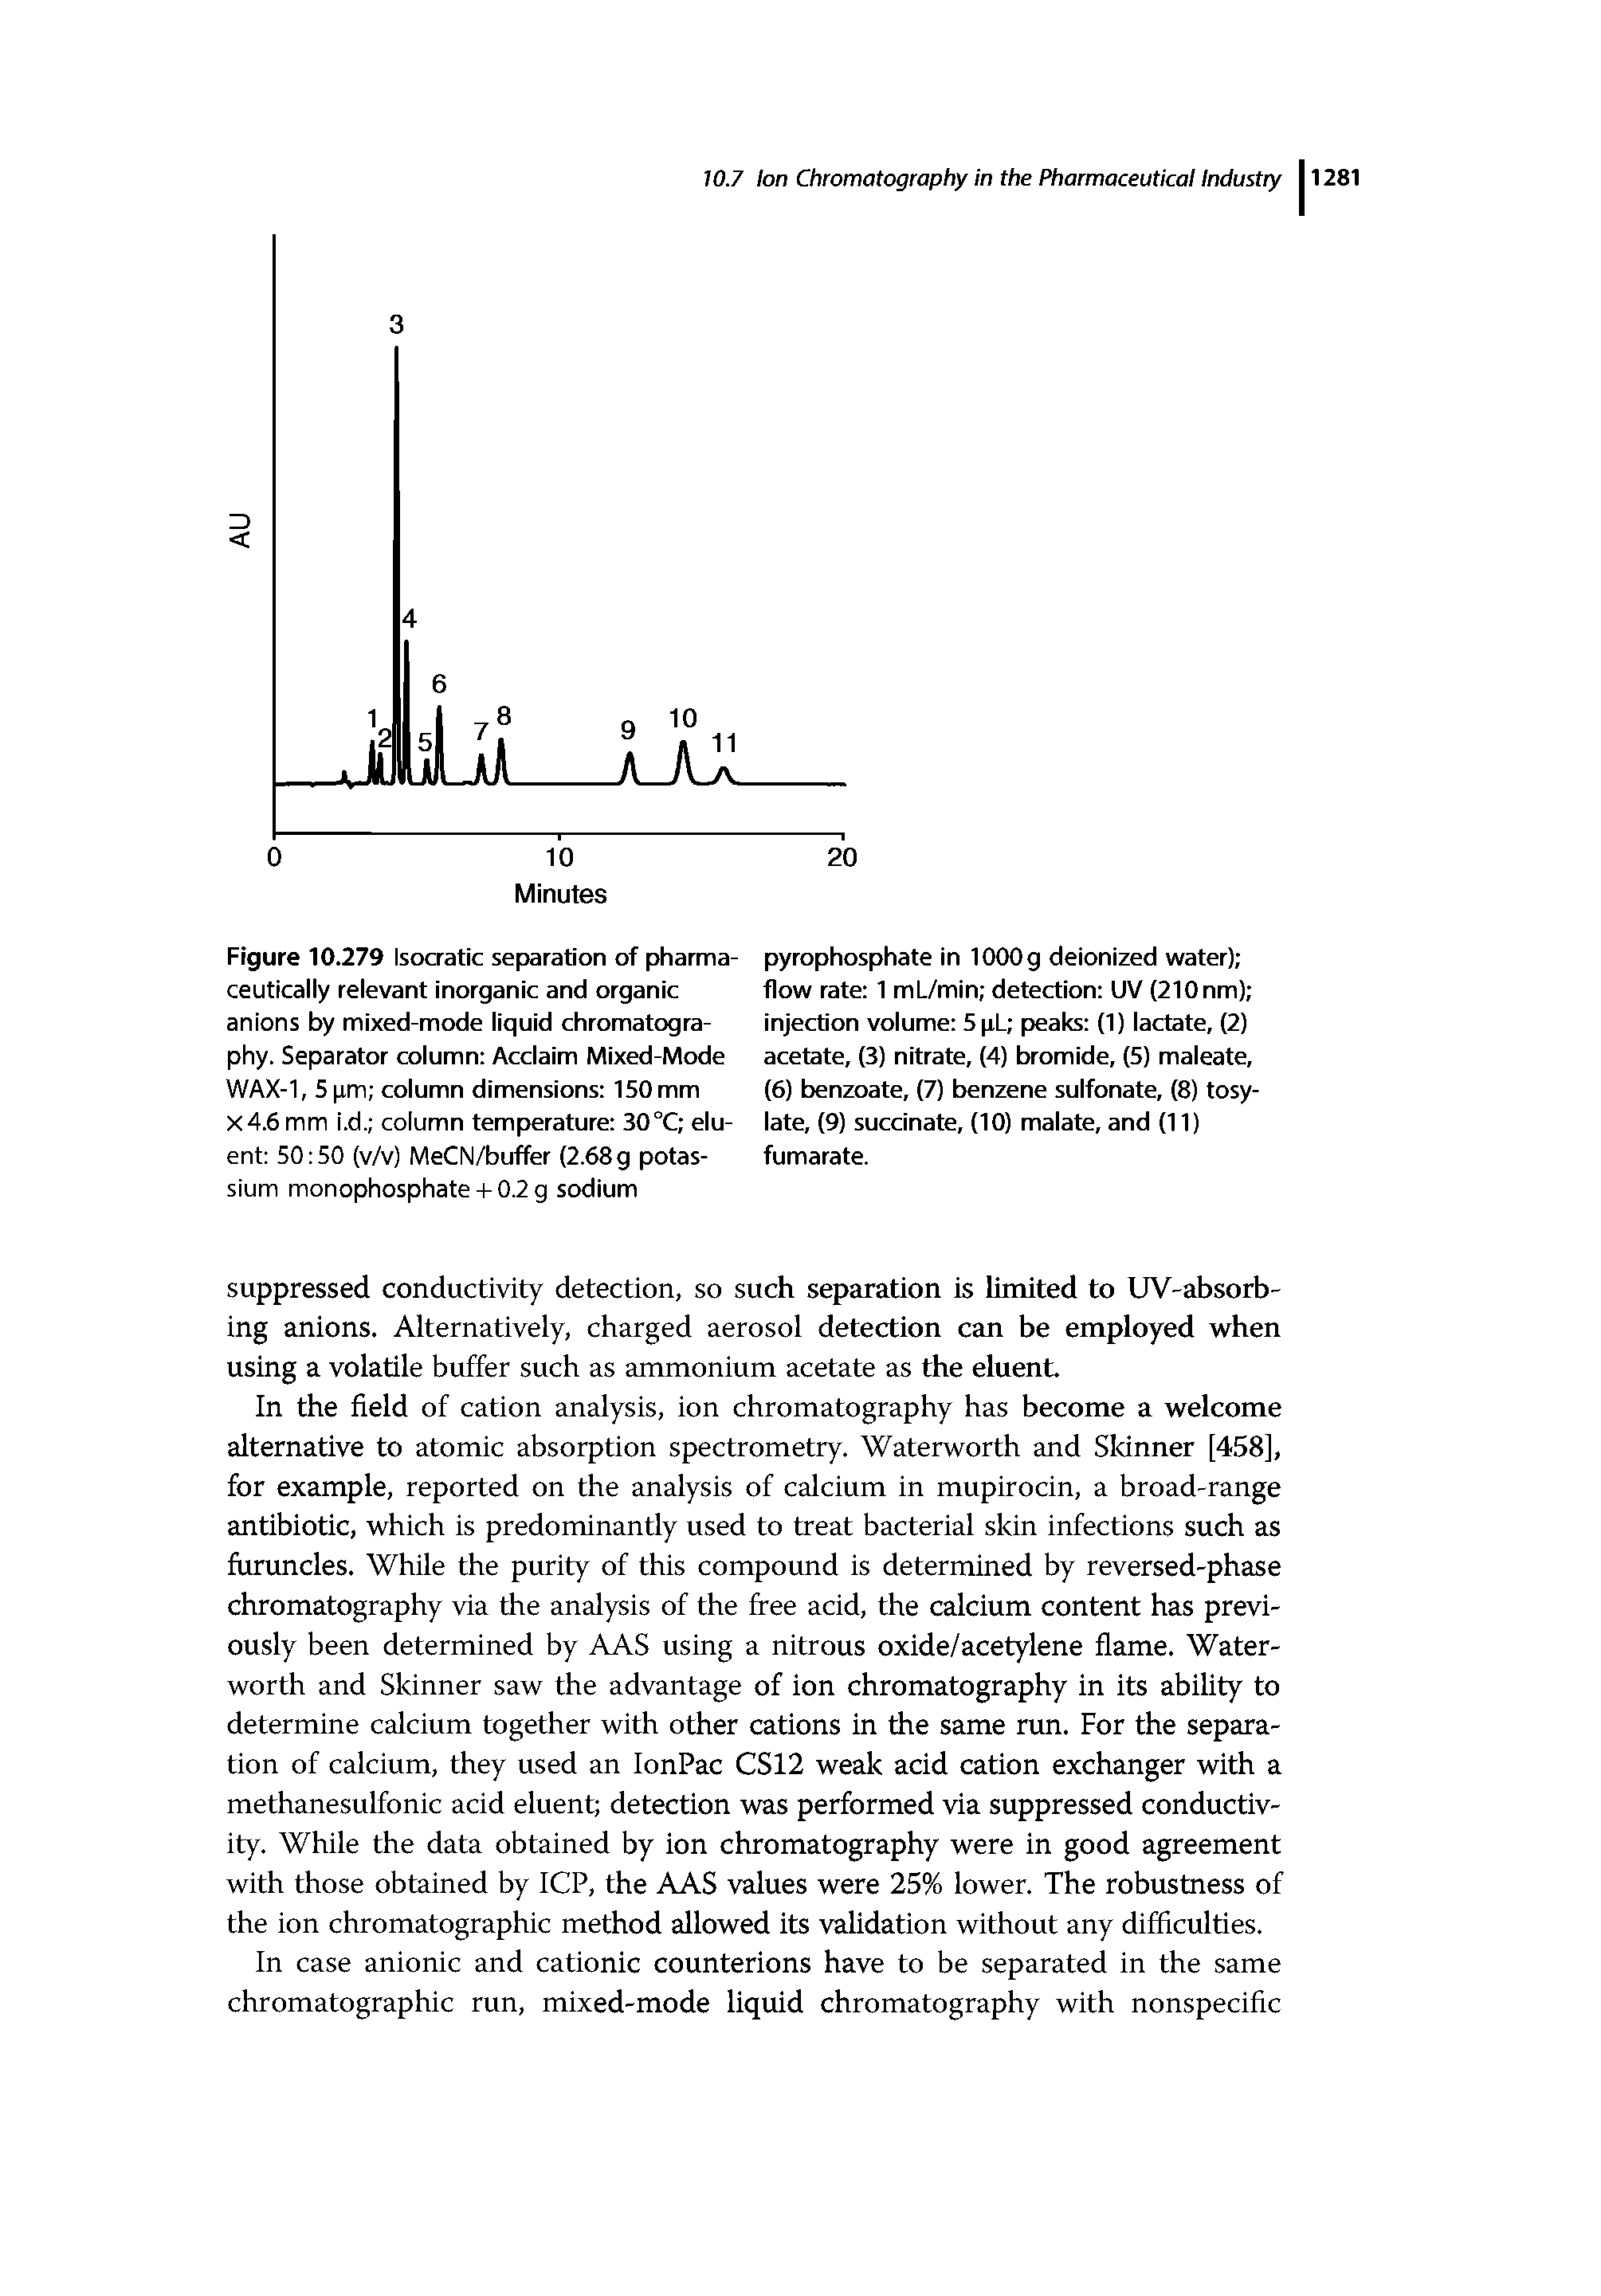 Figure 10.279 Isocratic separation of pharmaceutically relevant inorganic and organic anions by mixed-mode liquid chromatography. Separator column Acclaim Mixed-Mode WAX-1, S m column dimensions 150 mm X4.6 mm i.d. column temperature 30°C eluent 50 50 (v/v) MeCN/buffer (2.68 g potassium monophosphate-I-0.2 g sodium...